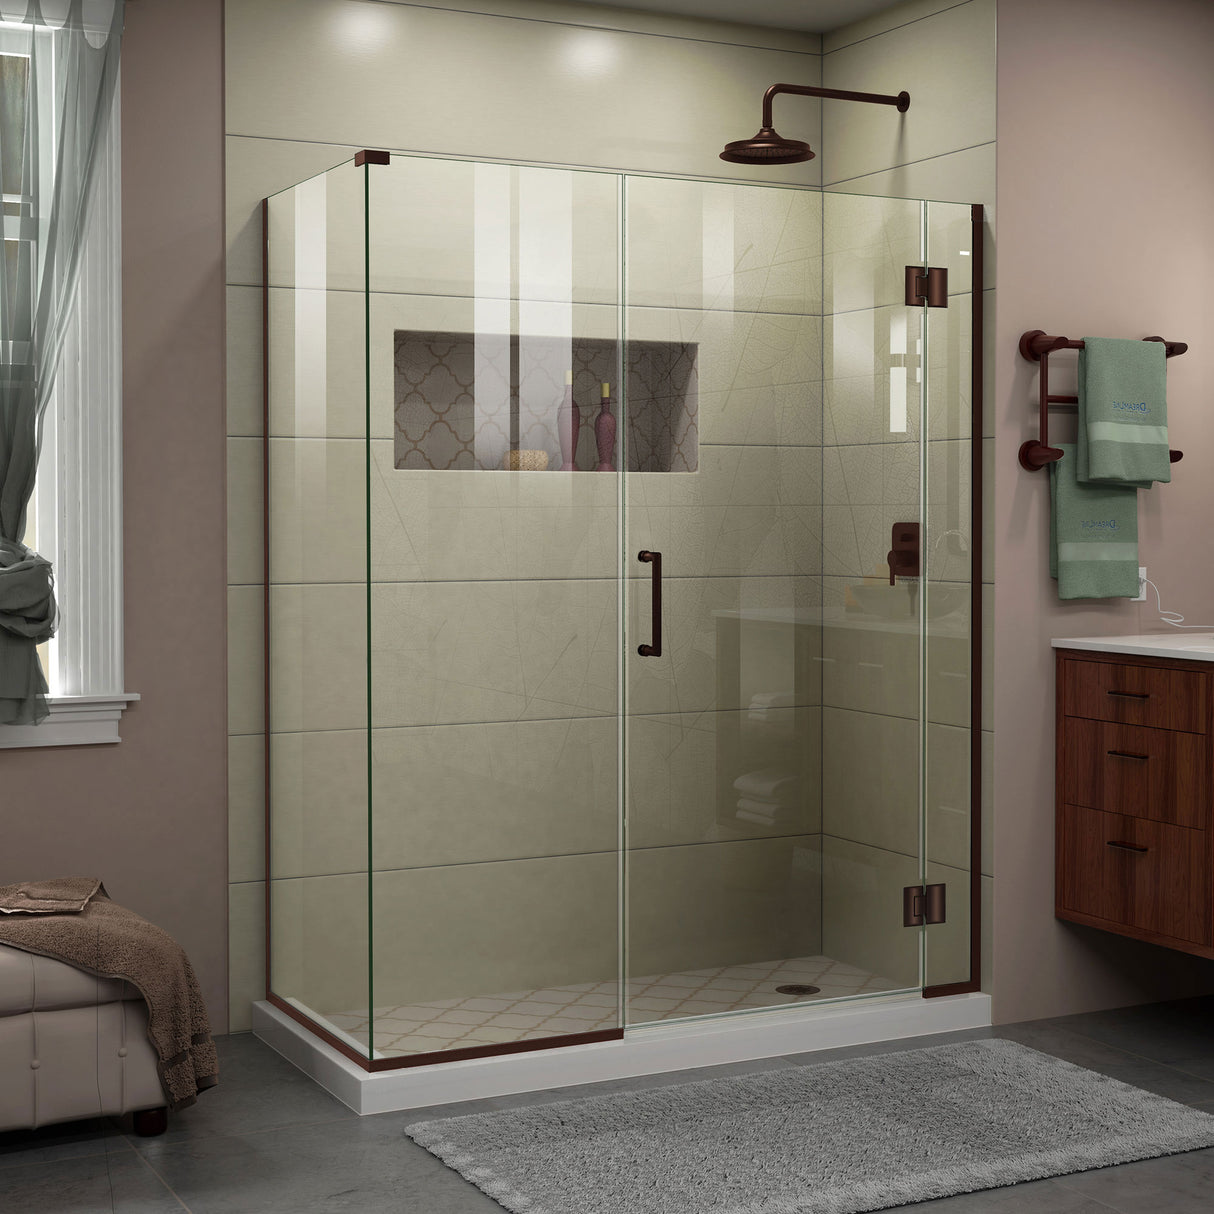 DreamLine Unidoor-X 45 1/2 in. W x 34 3/8 in. D x 72 in. H Frameless Hinged Shower Enclosure in Oil Rubbed Bronze